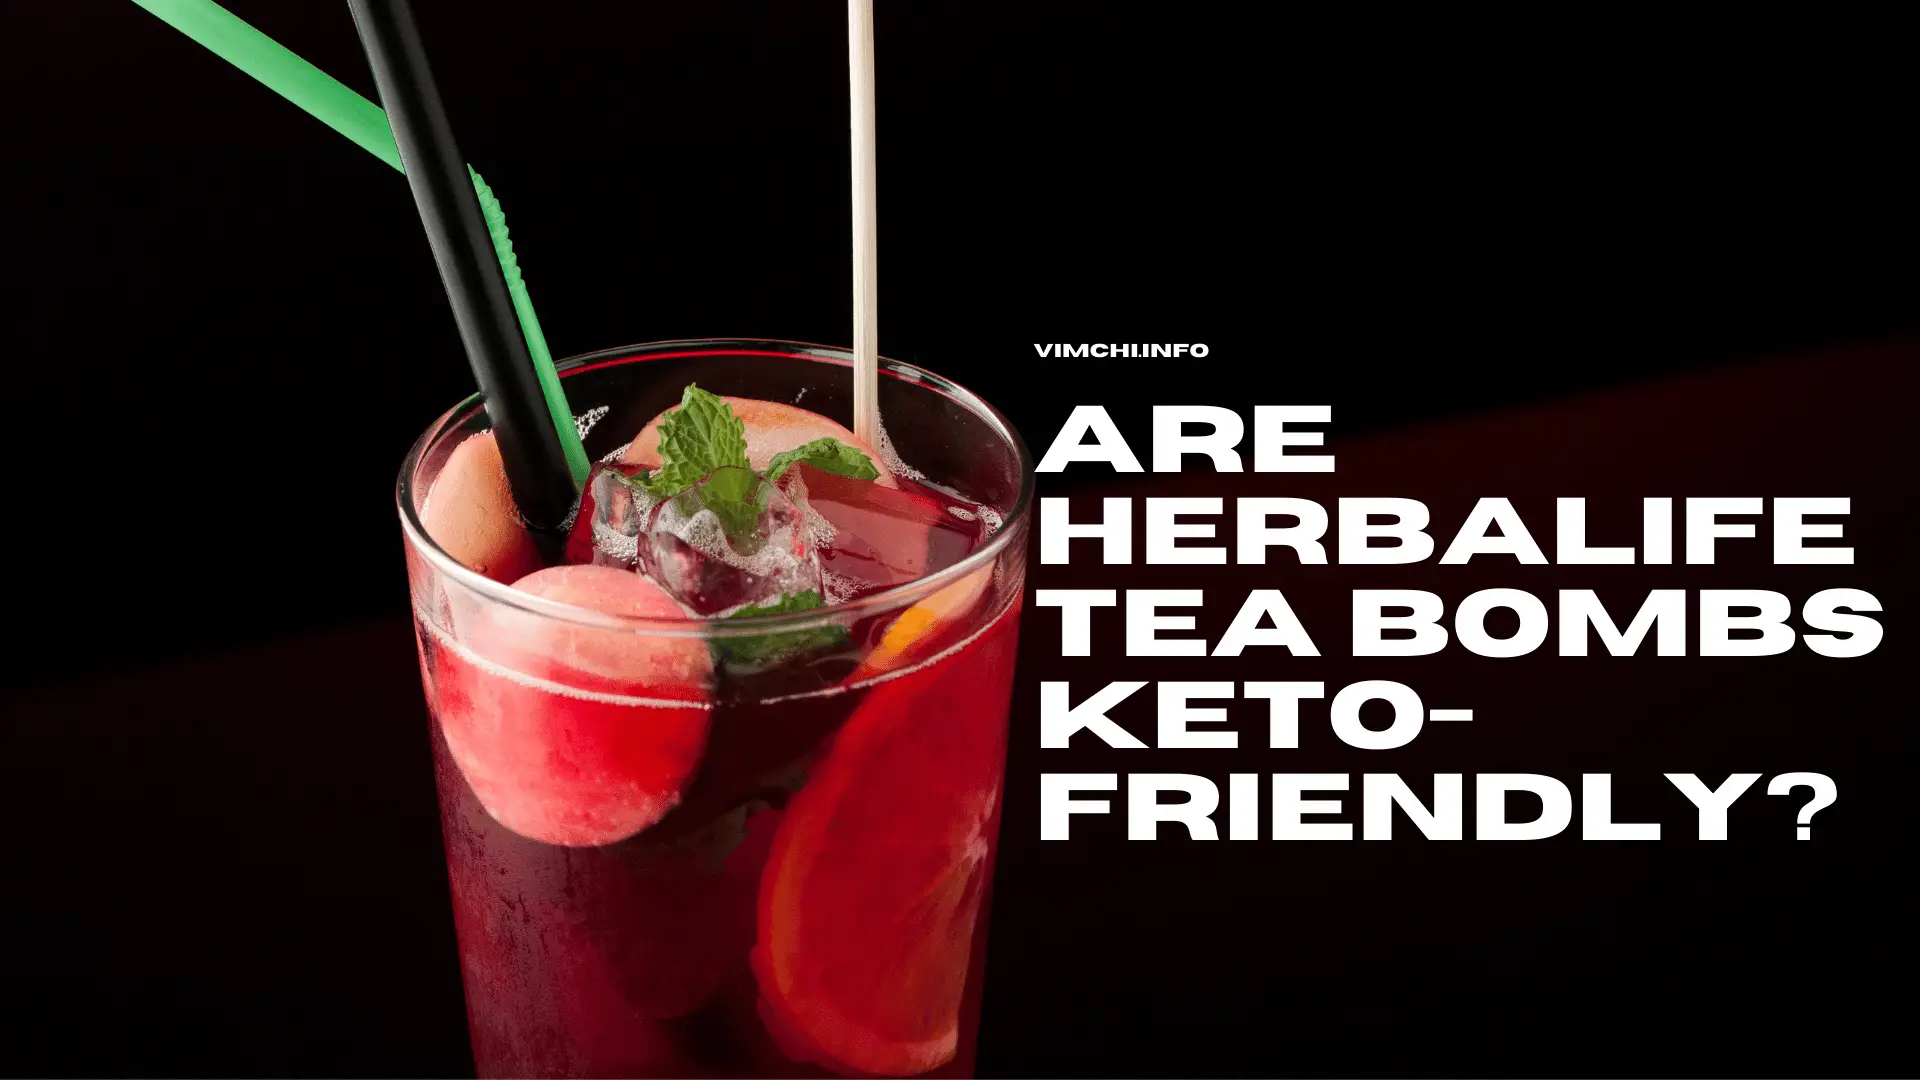 Are Herbalife Tea Bombs Keto-Friendly - featured